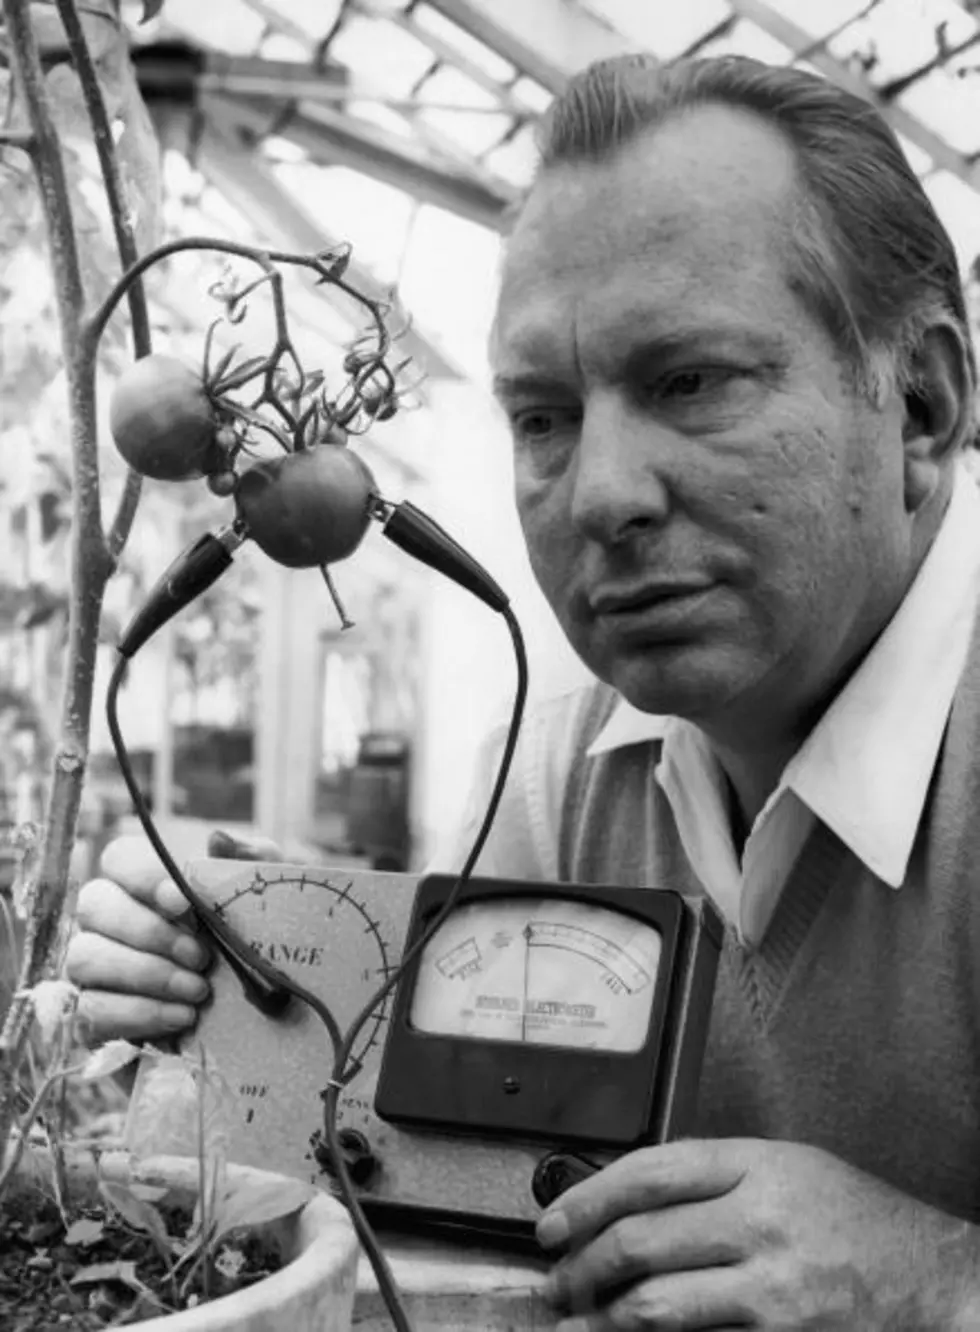 How Do You Celebrate L. Ron Hubbard’s Birthday?